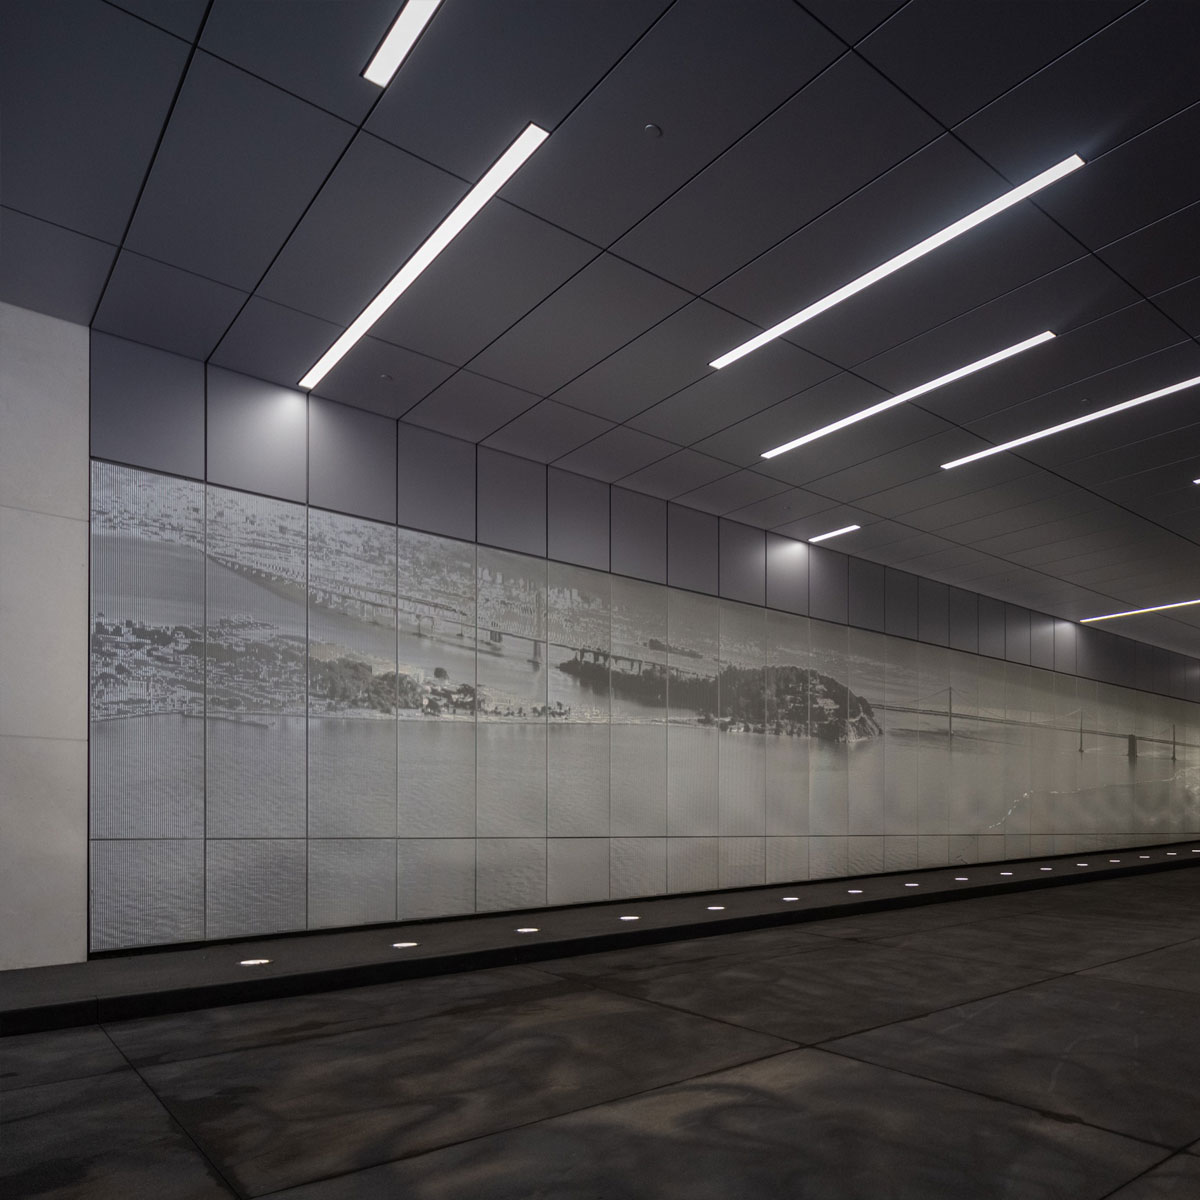 California Pacific Medical Center: Ombrae Installation